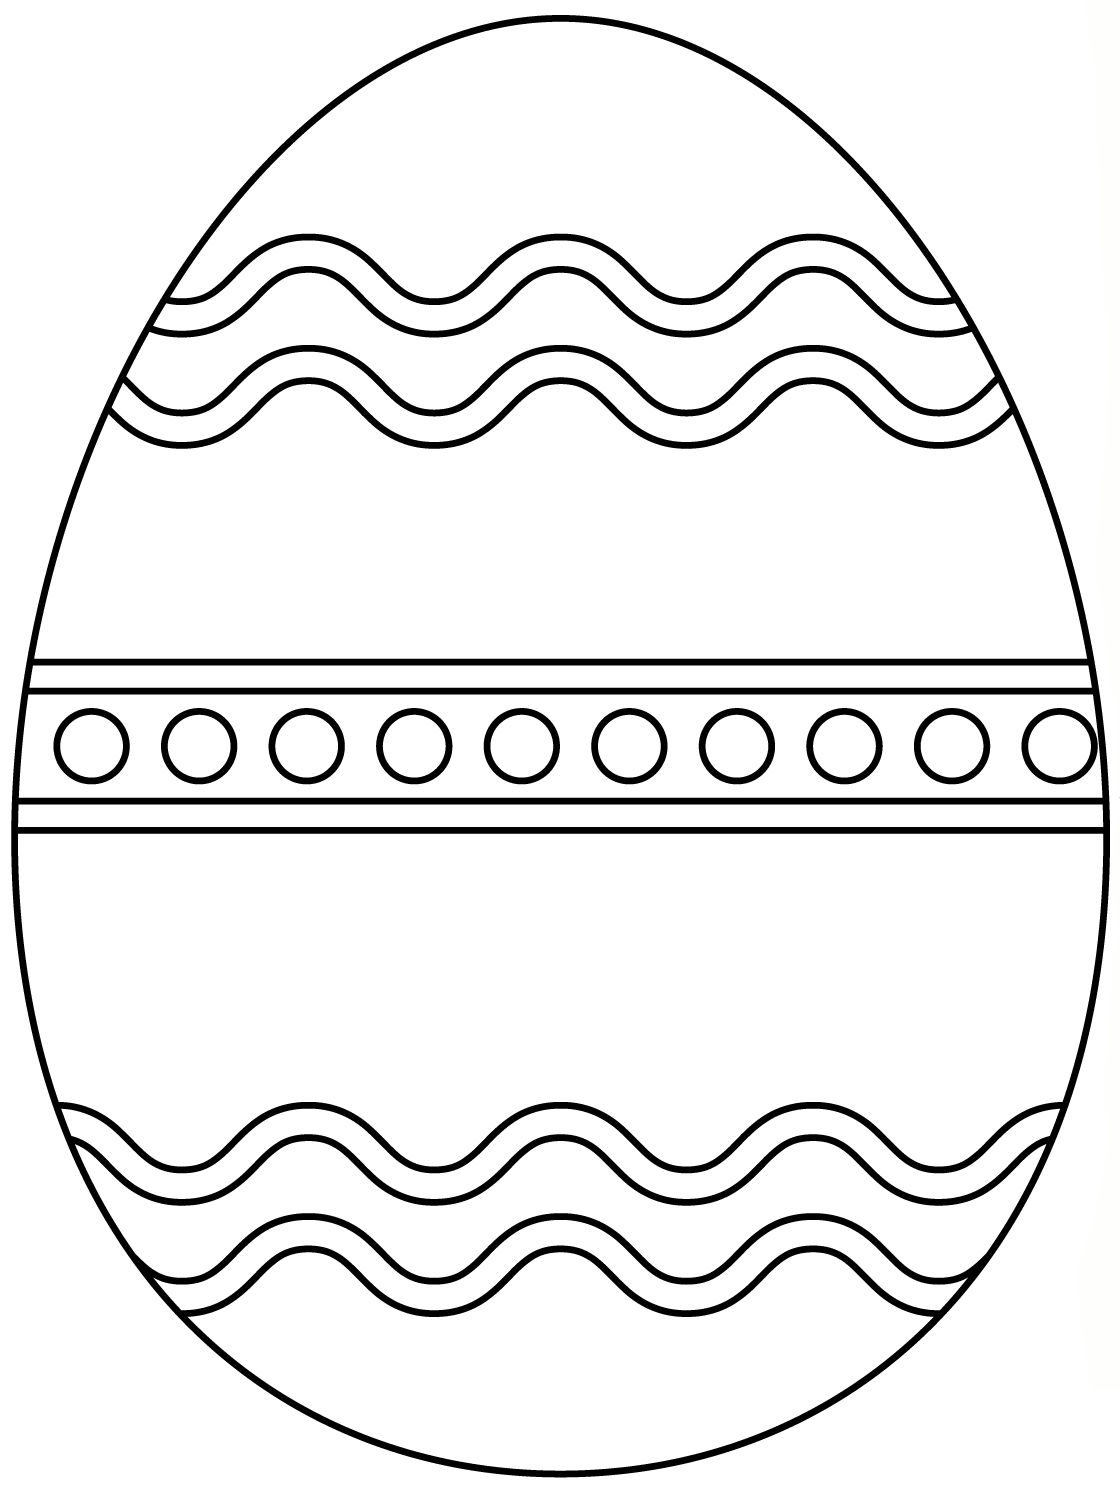 Easter Egg With Abstract Pattern 3 1 Coloring Page